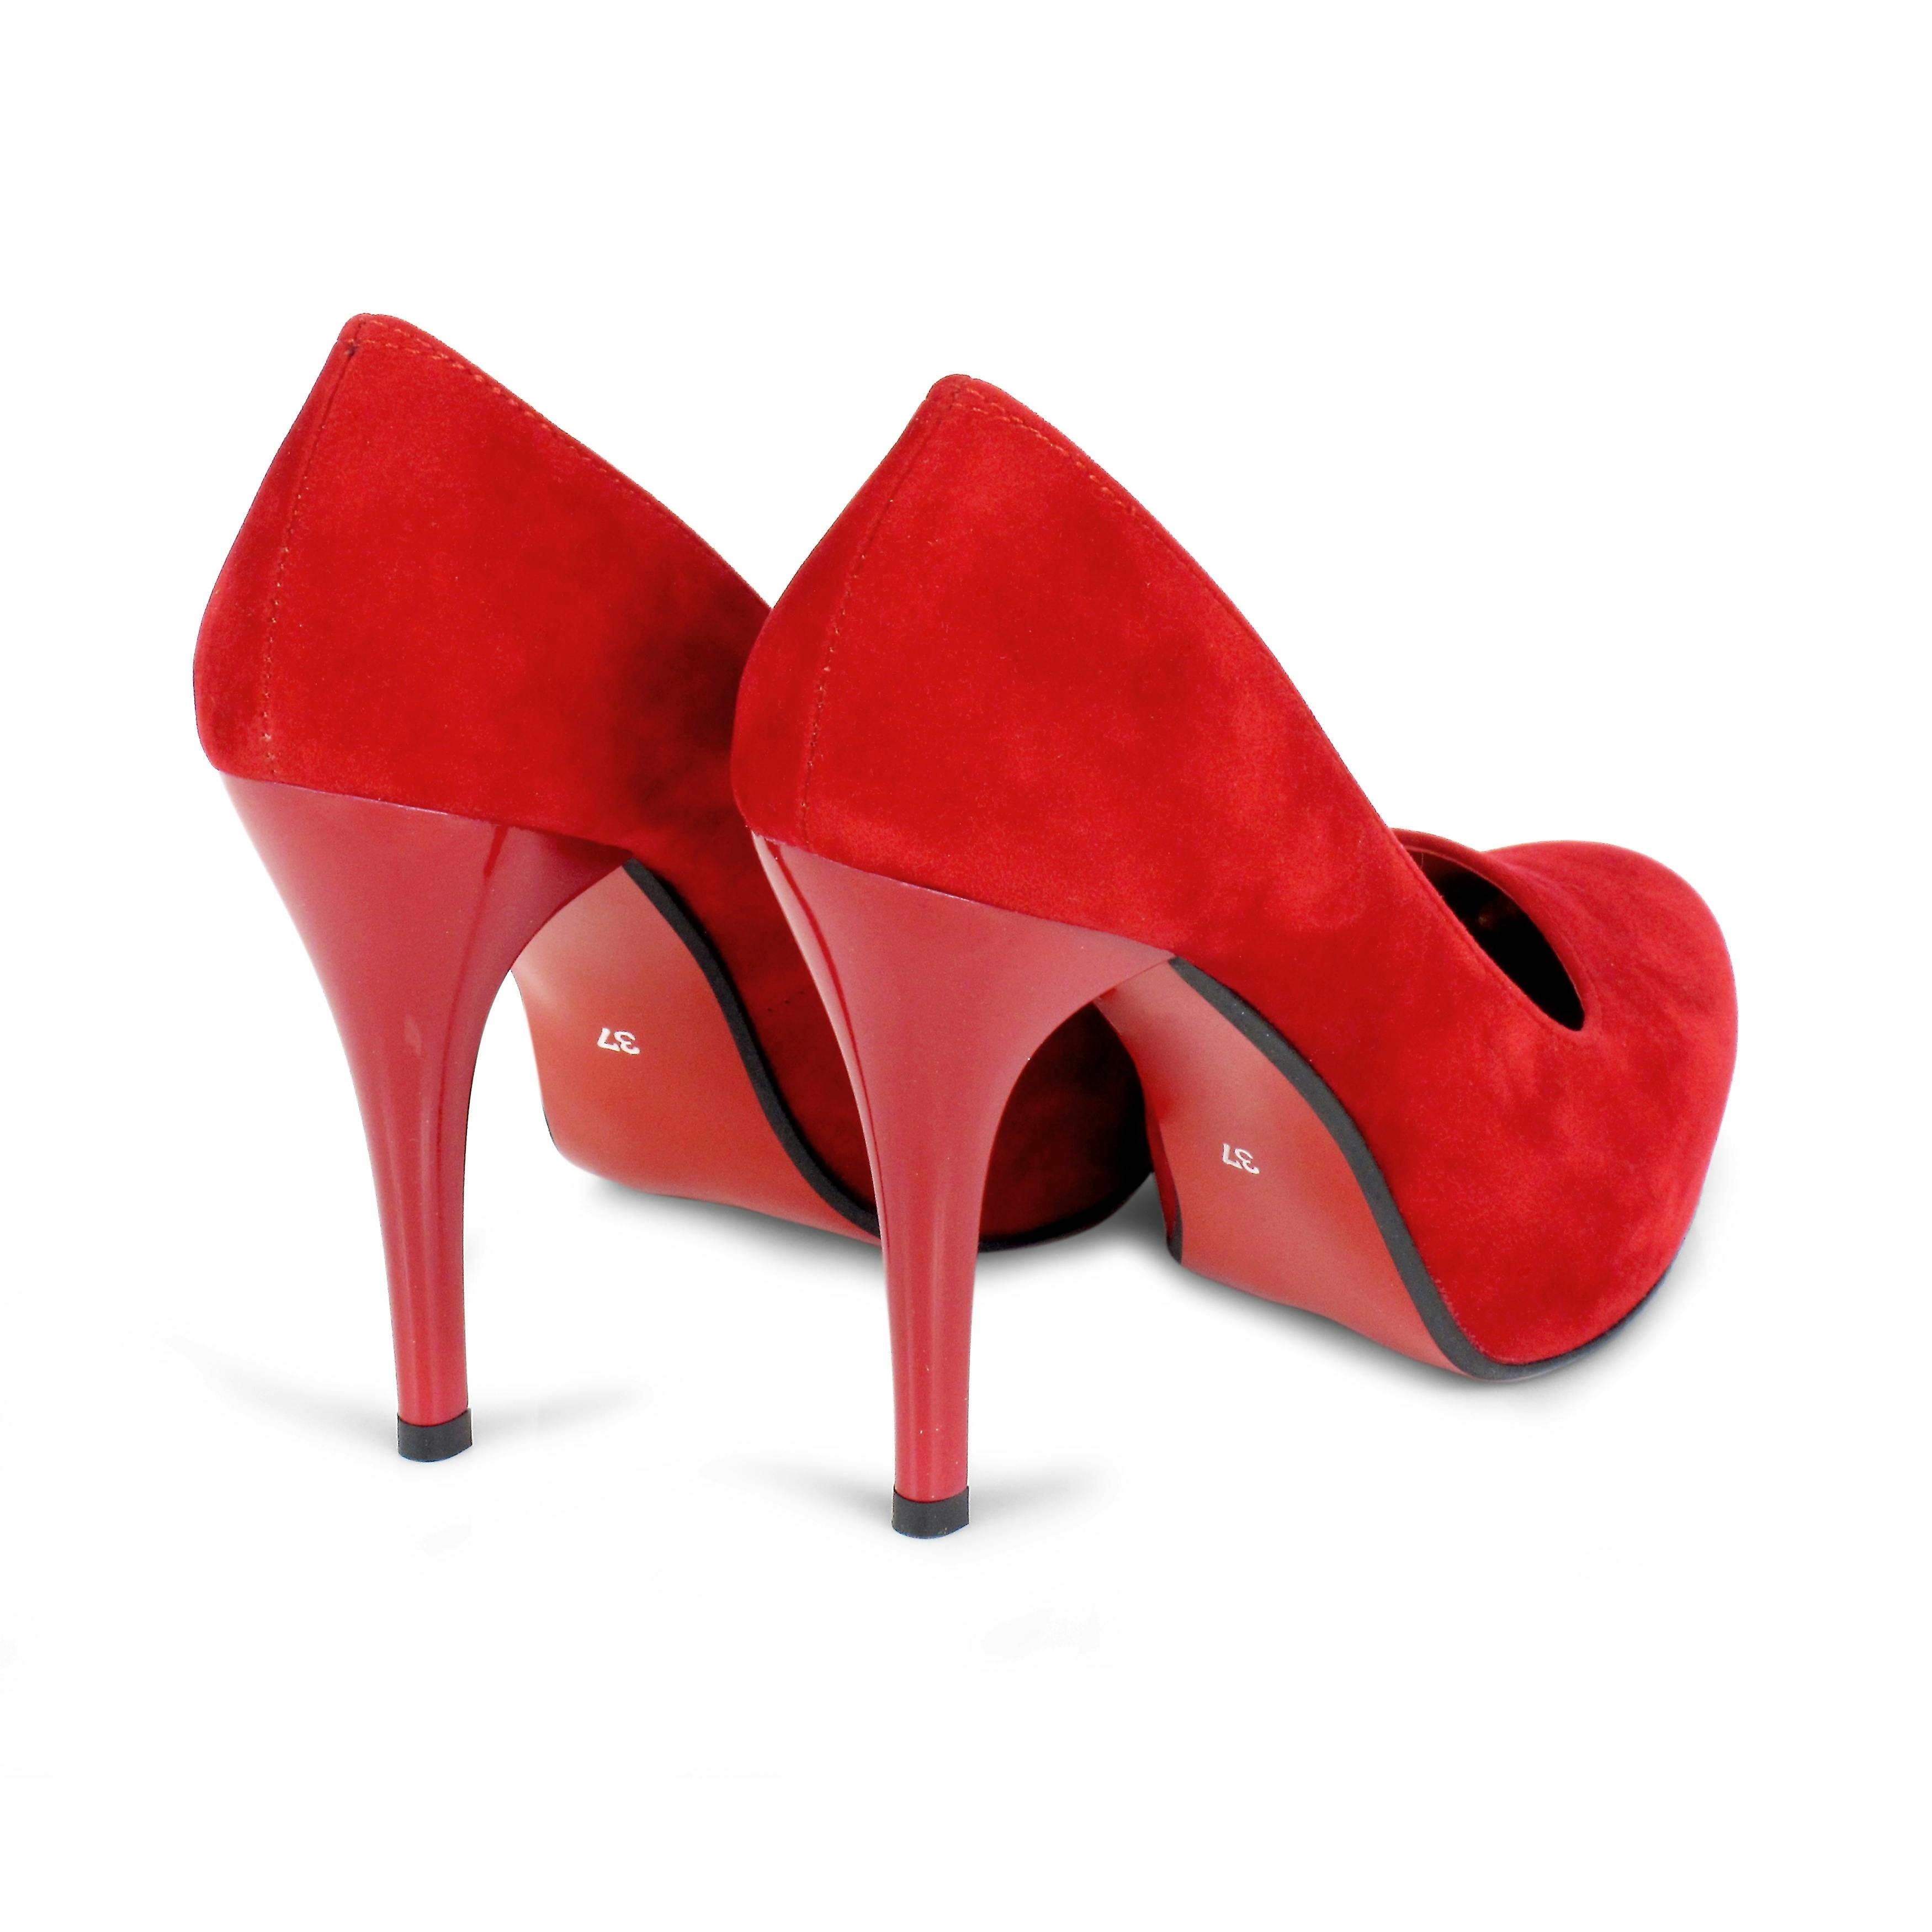 red pump shoes